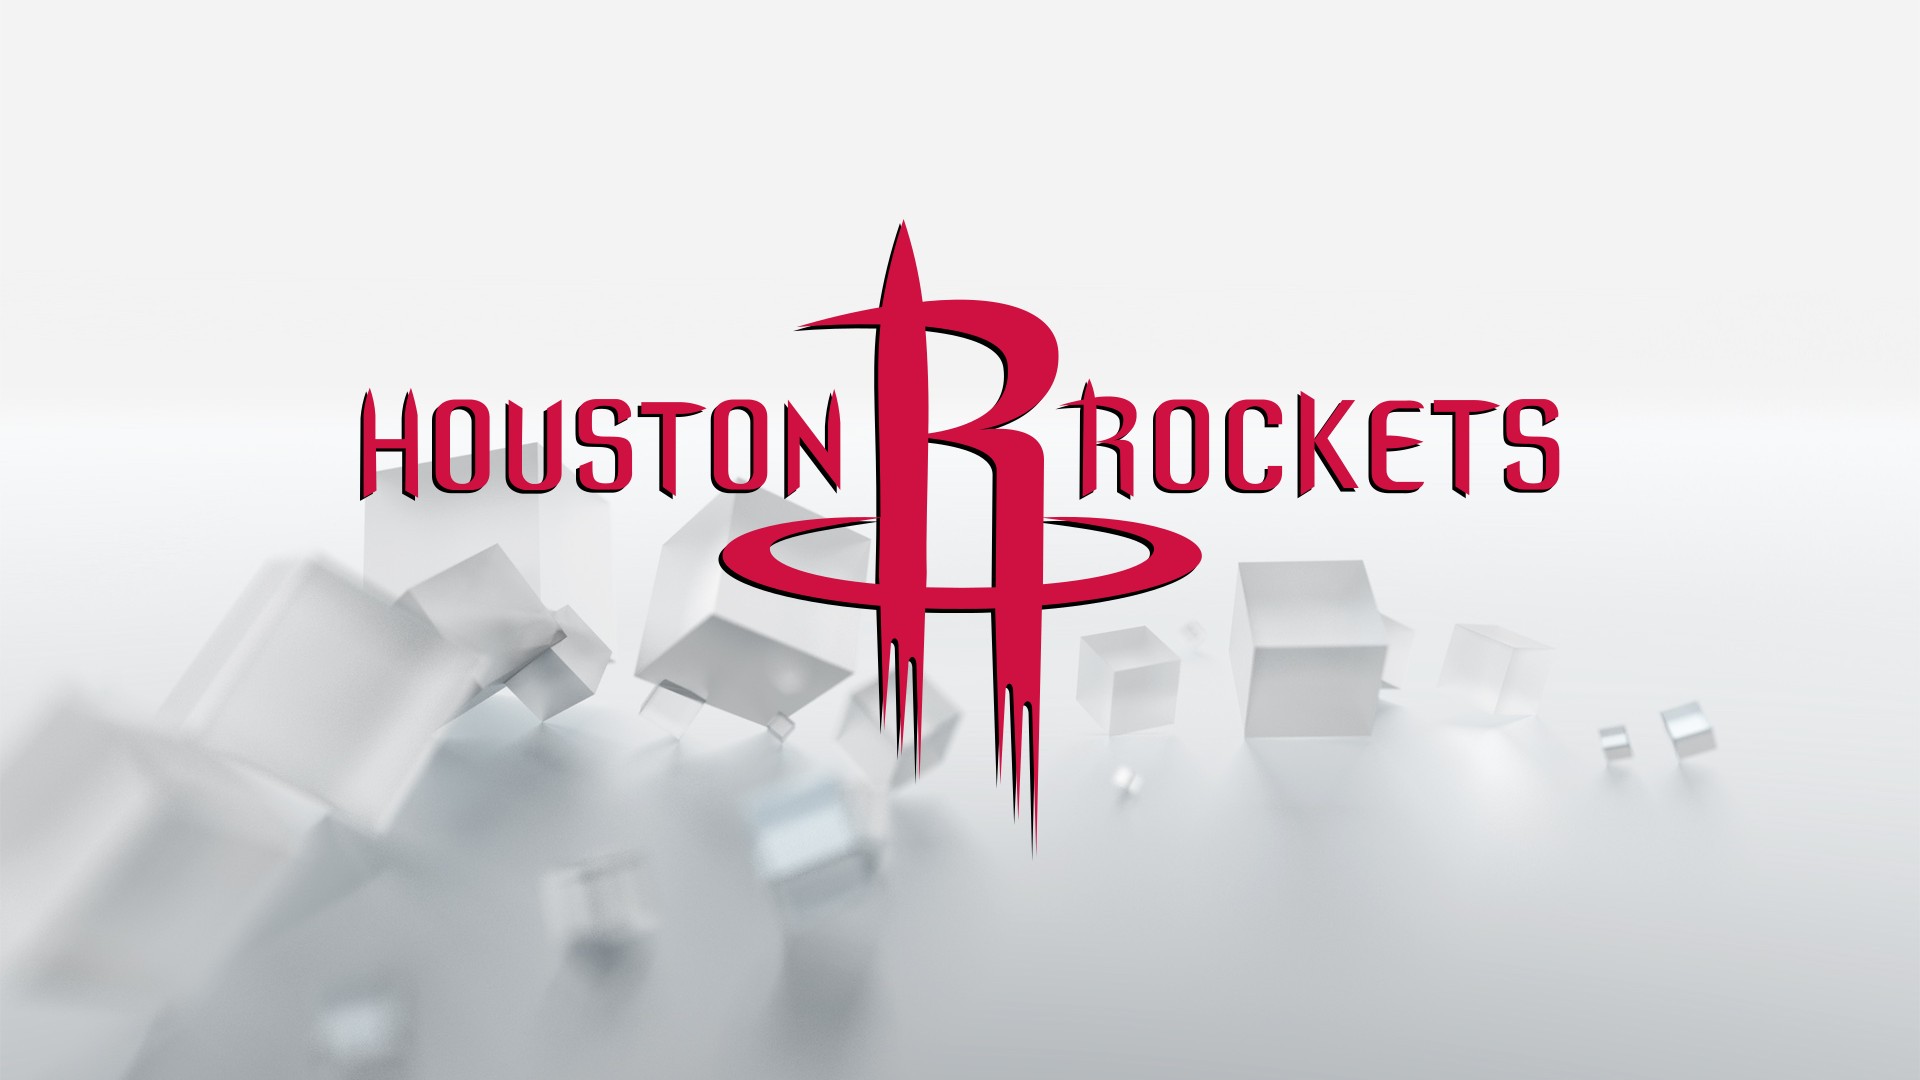 Wallpapers HD Rockets with image dimensions 1920x1080 pixel. You can make this wallpaper for your Desktop Computer Backgrounds, Windows or Mac Screensavers, iPhone Lock screen, Tablet or Android and another Mobile Phone device